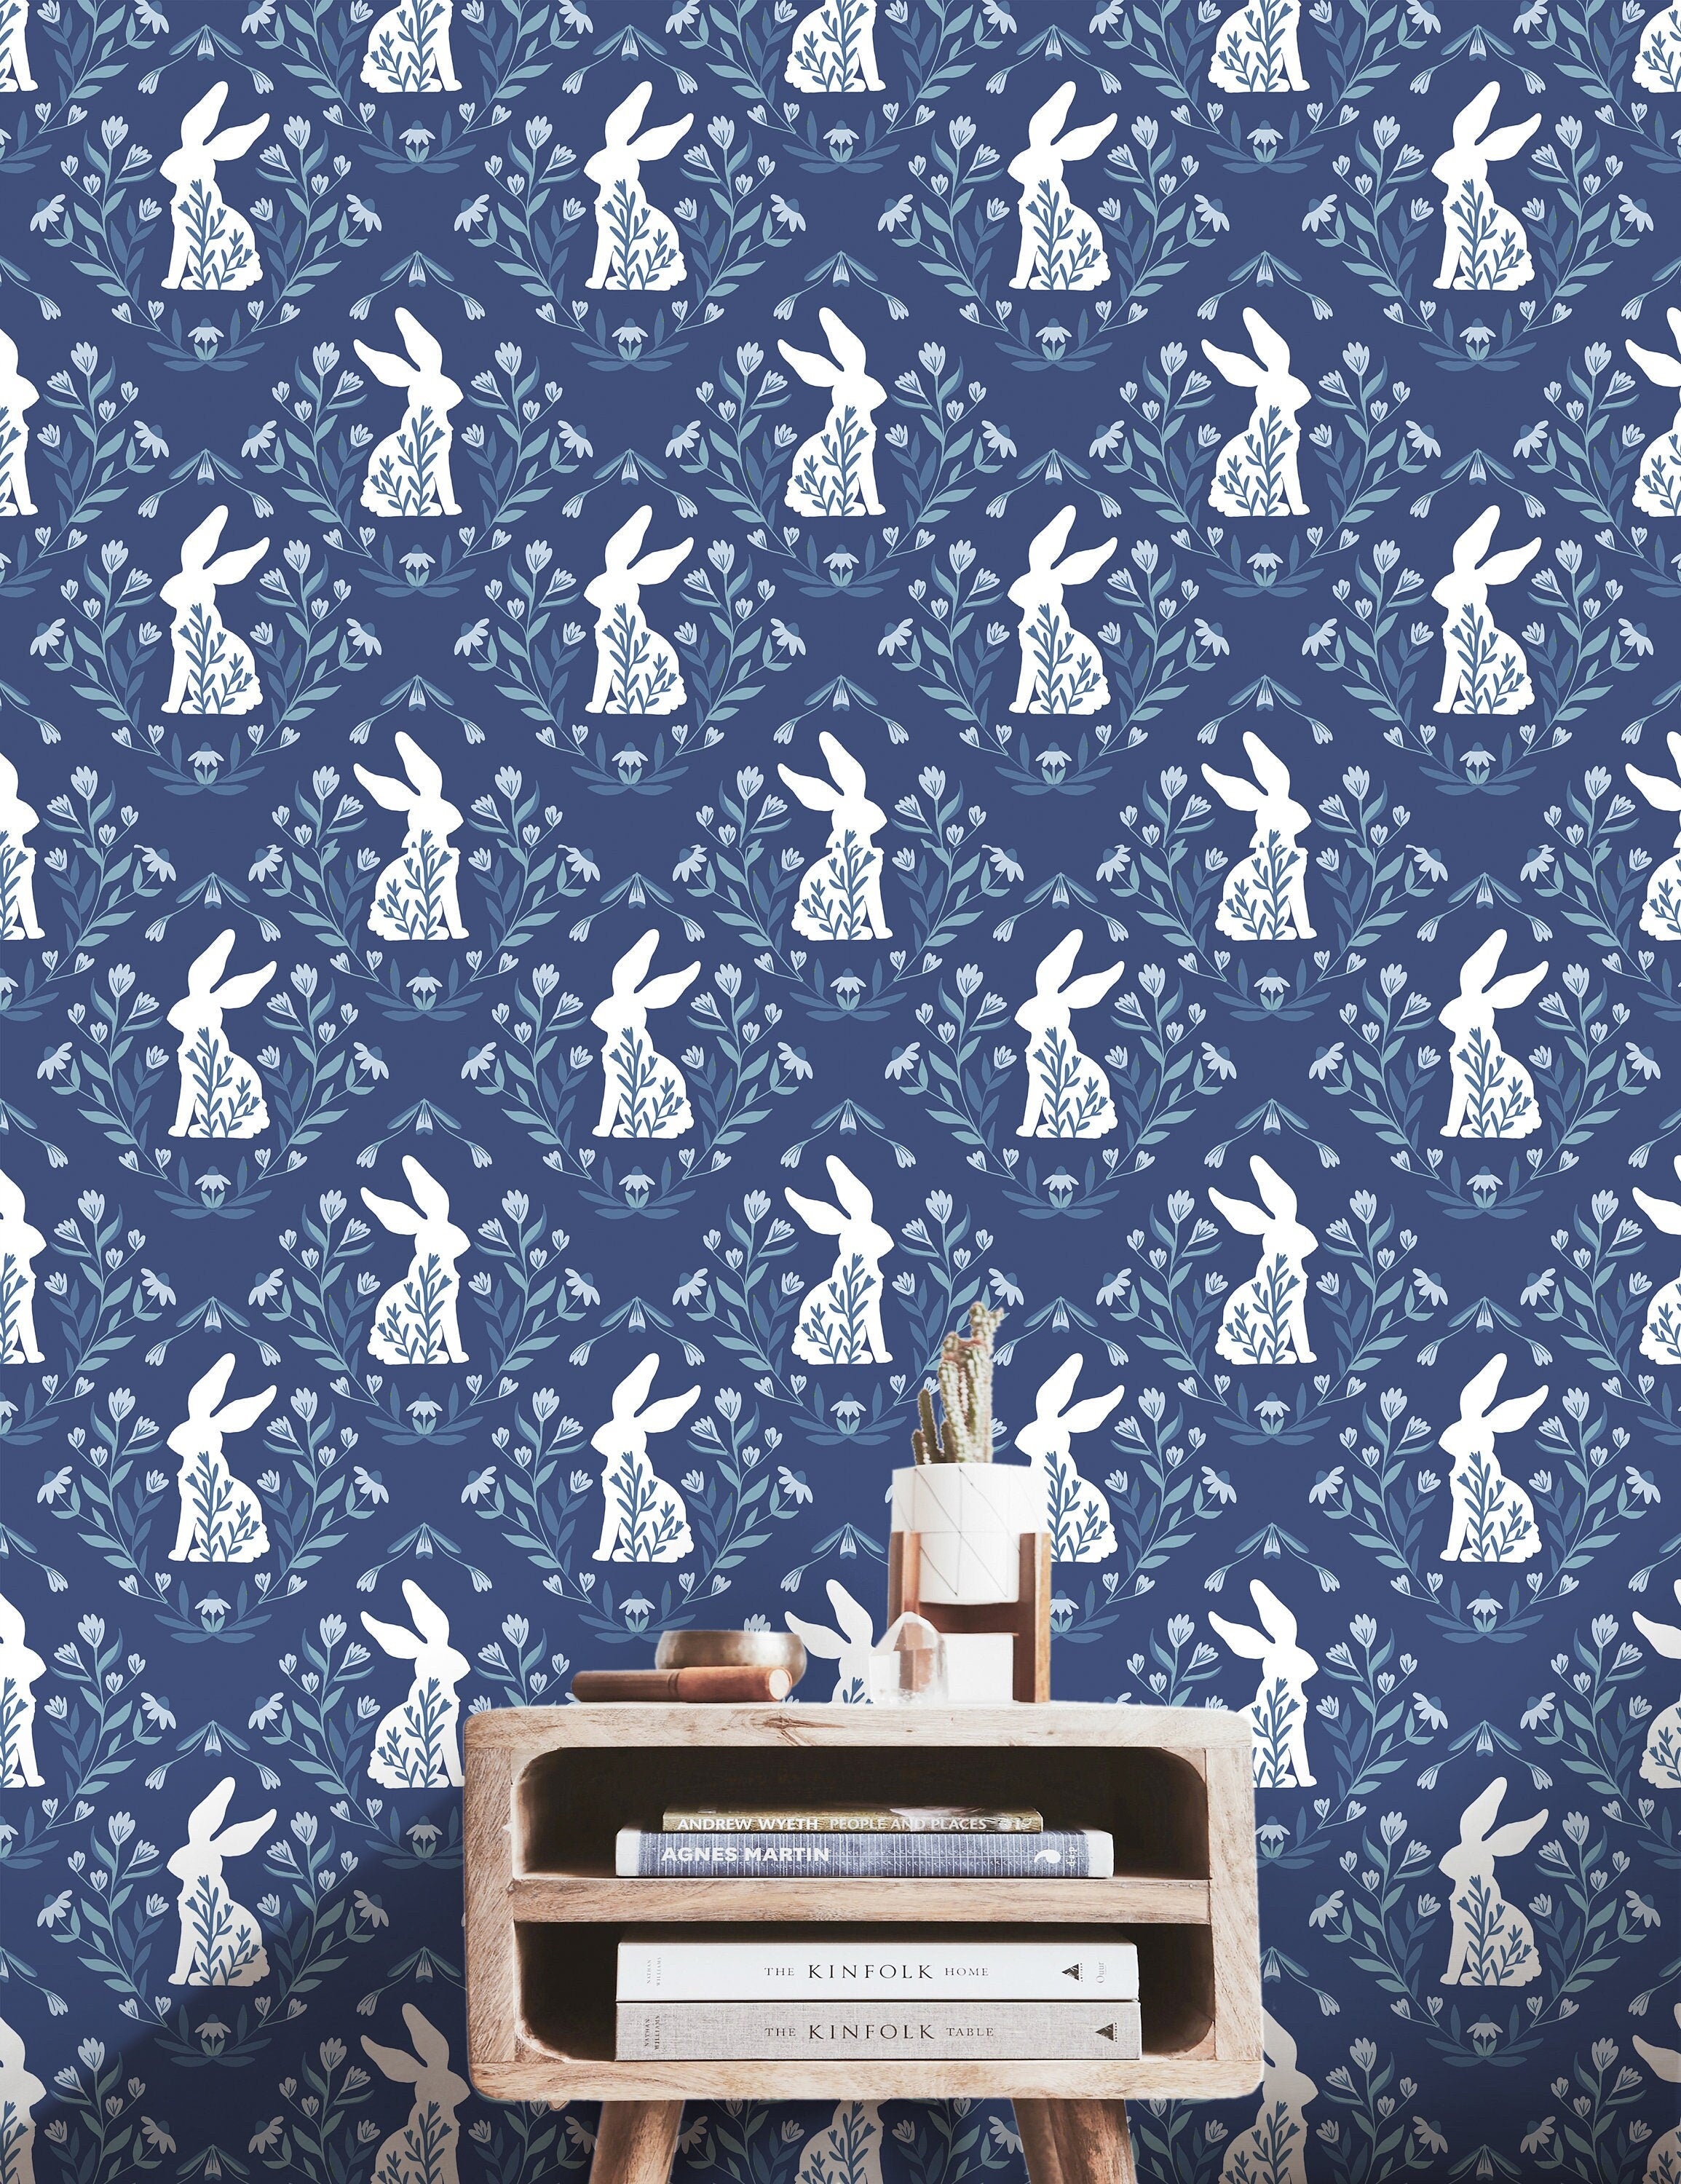 Wallpaper Peel and Stick Wallpaper Blue White Bunnies with Floral Removable Wallpaper Wall Decor Home Decor Wall Art Room Decor 3765 - JamesAndColors